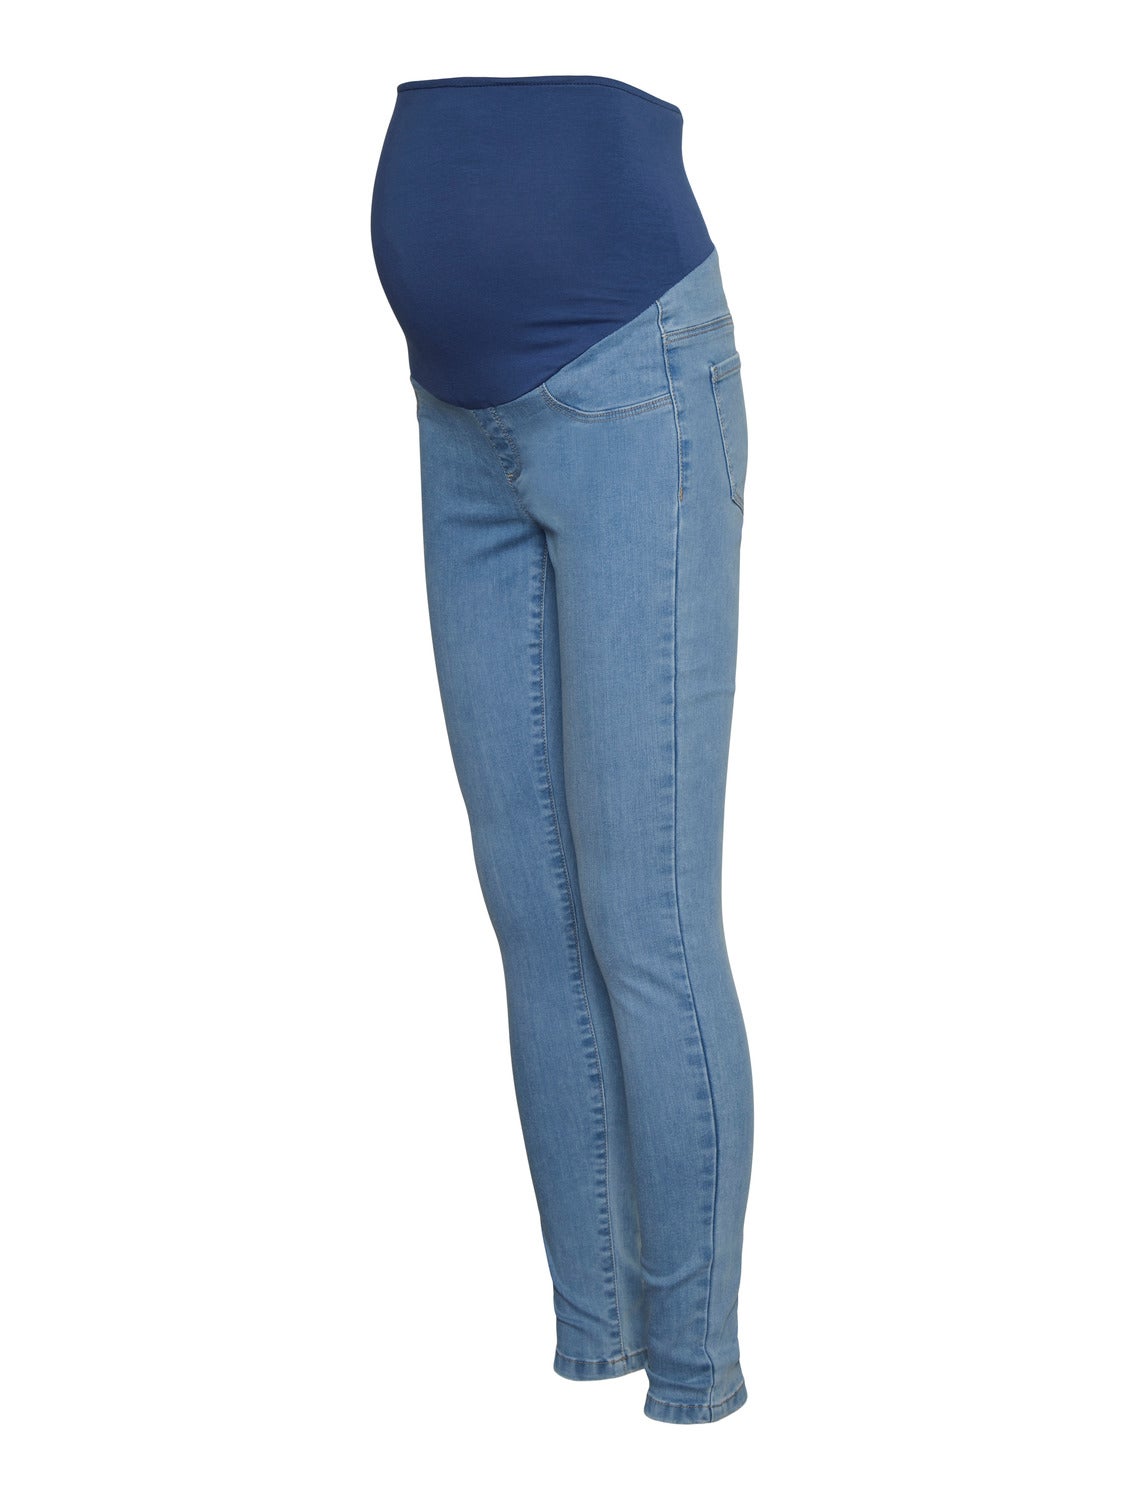 Buy Maacie Maternity Jean Butt Lifting Ripped Skinny Denim Shapewear Pant  Over Belly, Dark Blue, Small at Amazon.in